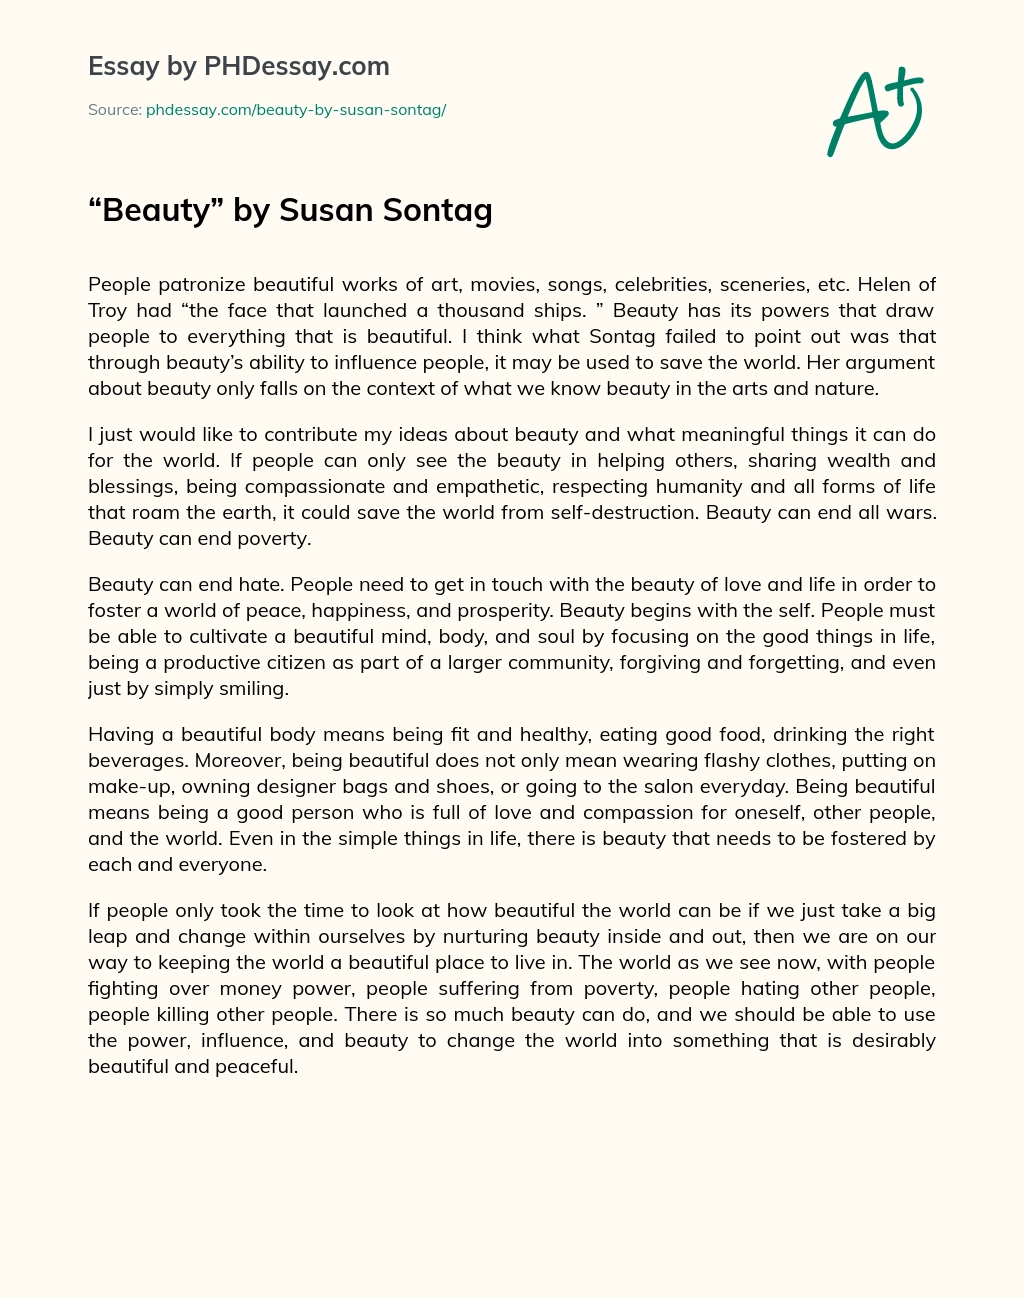 Beauty by Susan Sontag essay